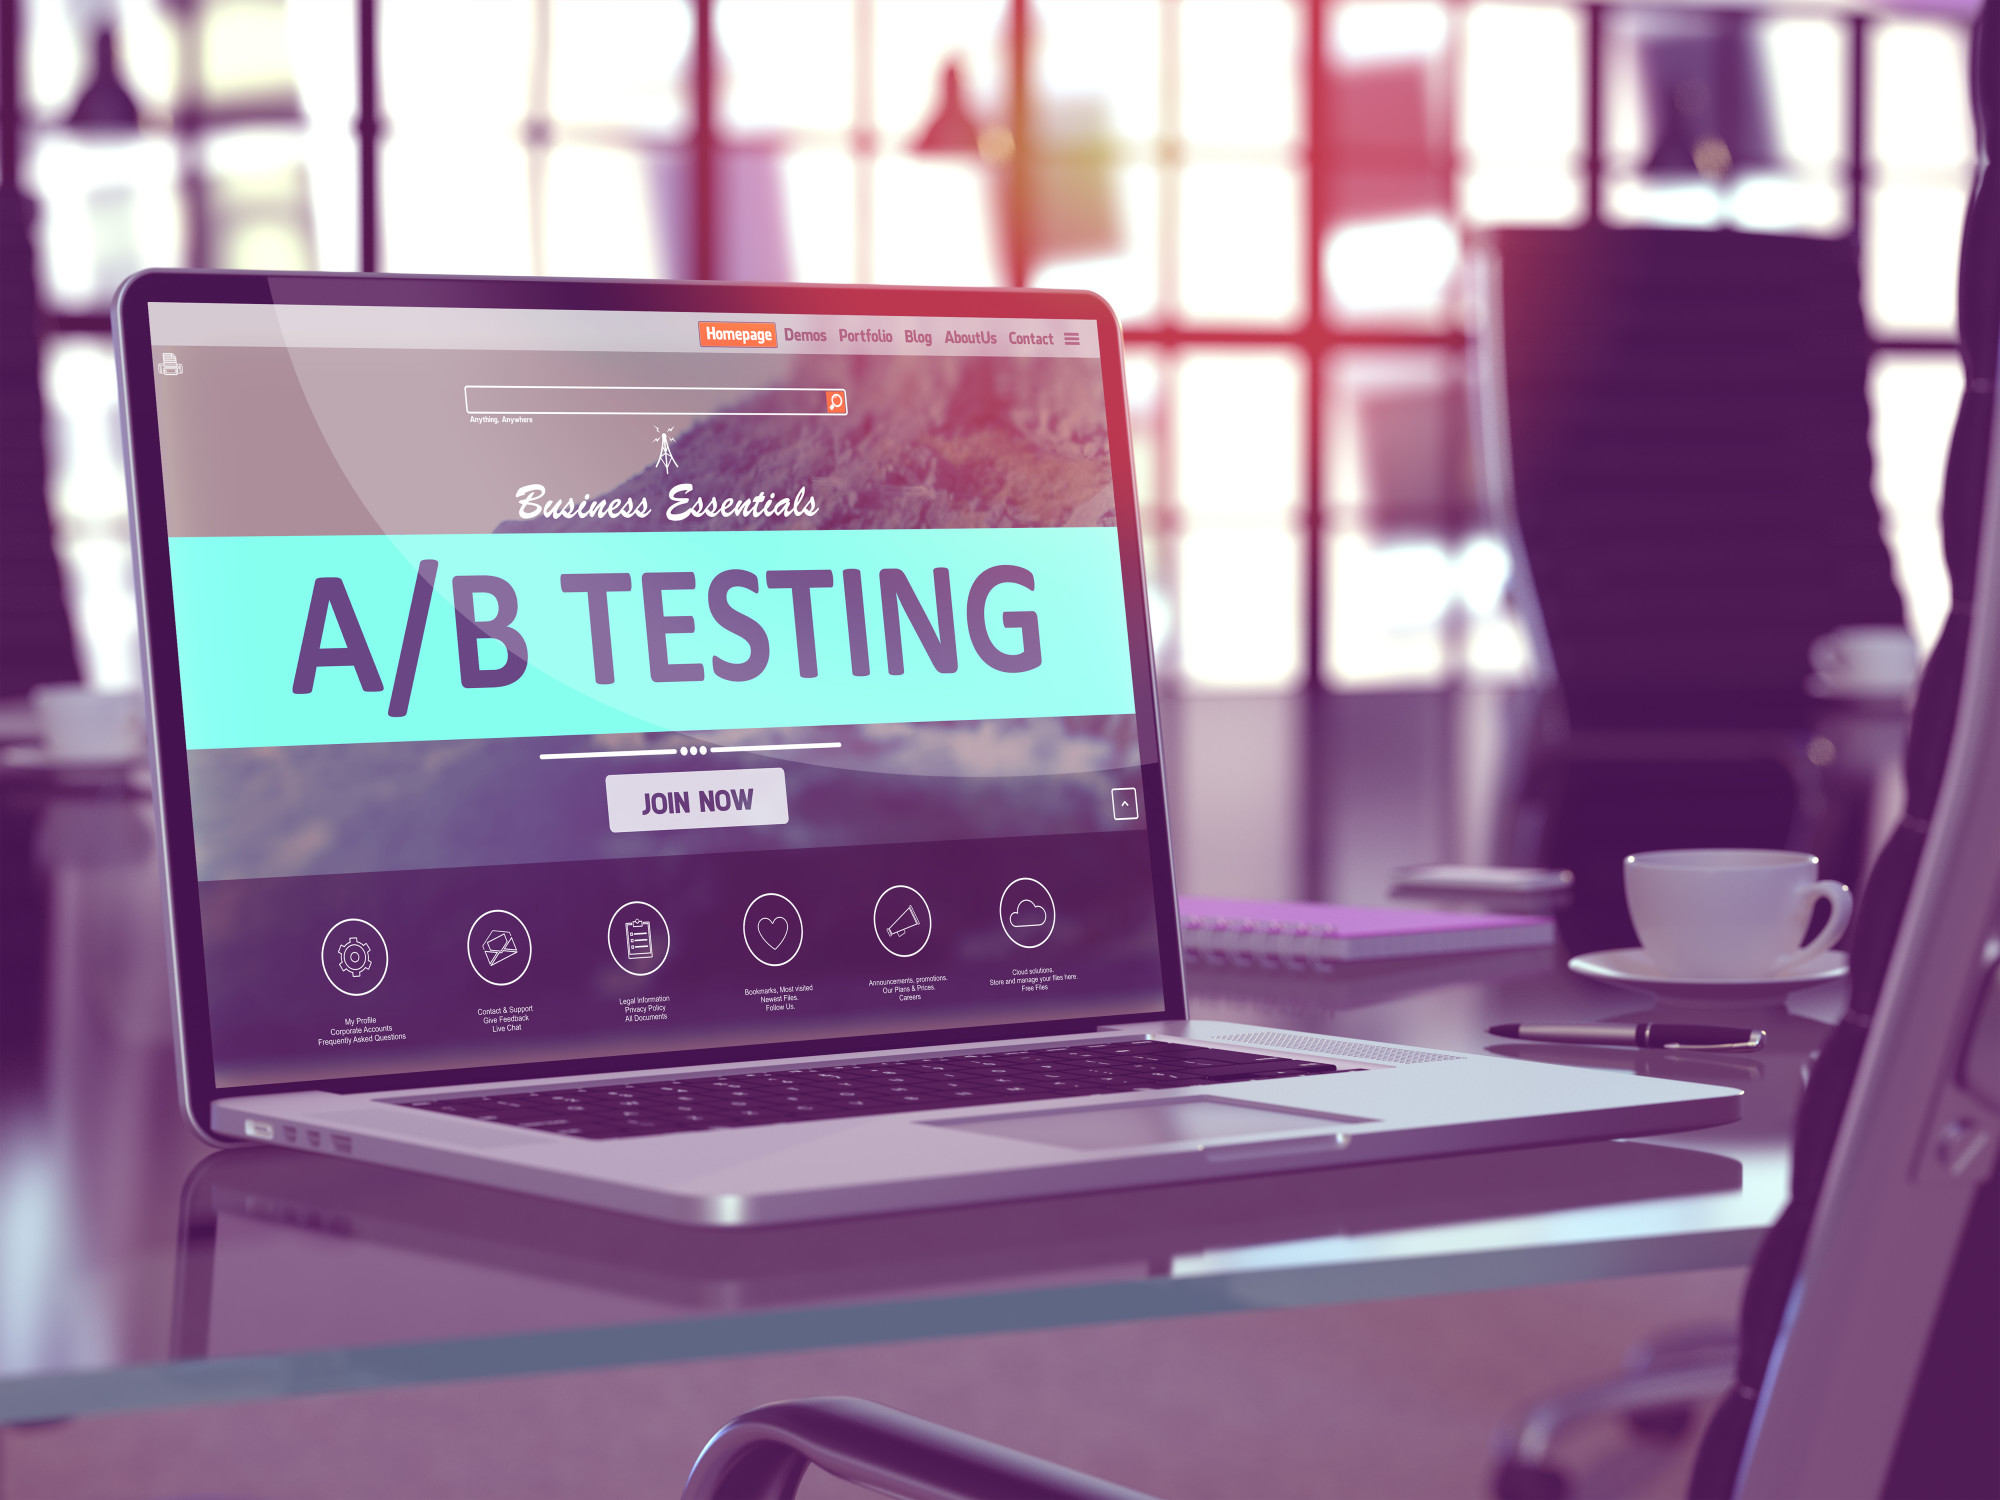 A/B Testing Your Subject Line to Increase Booking Rate